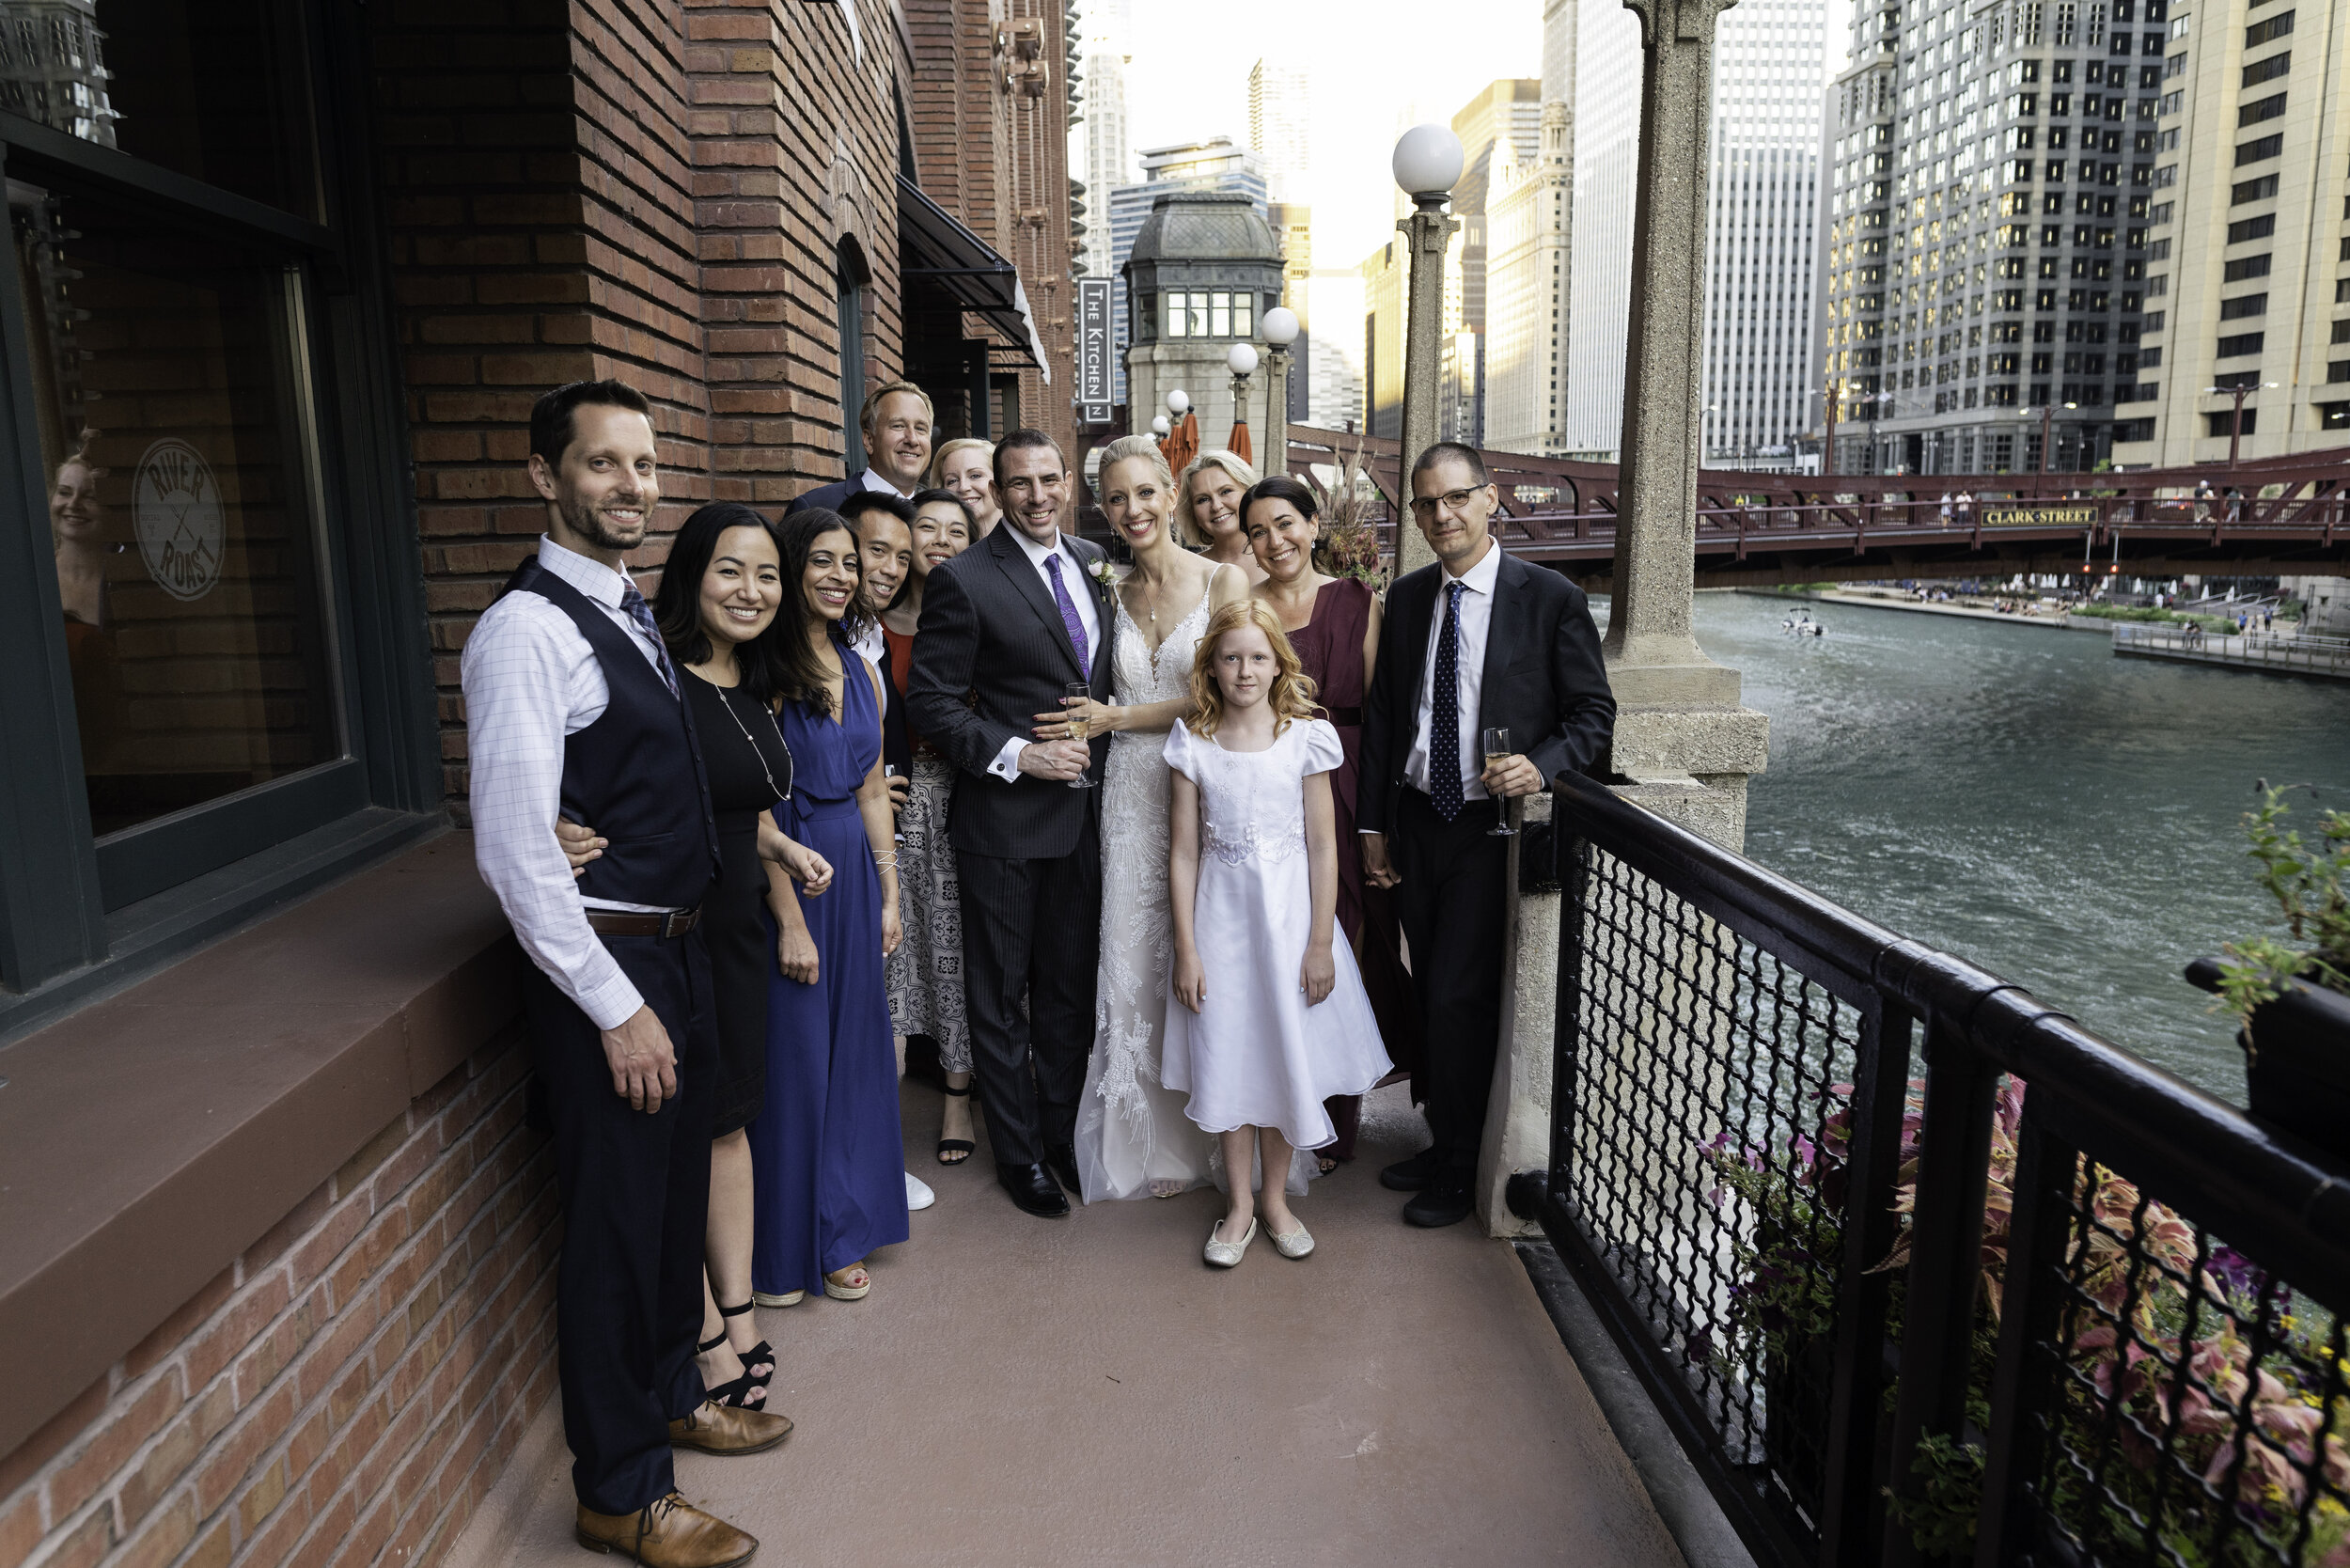 Sweet Summer Wedding Celebration in the City captured by Adam Novak | CHI thee WED